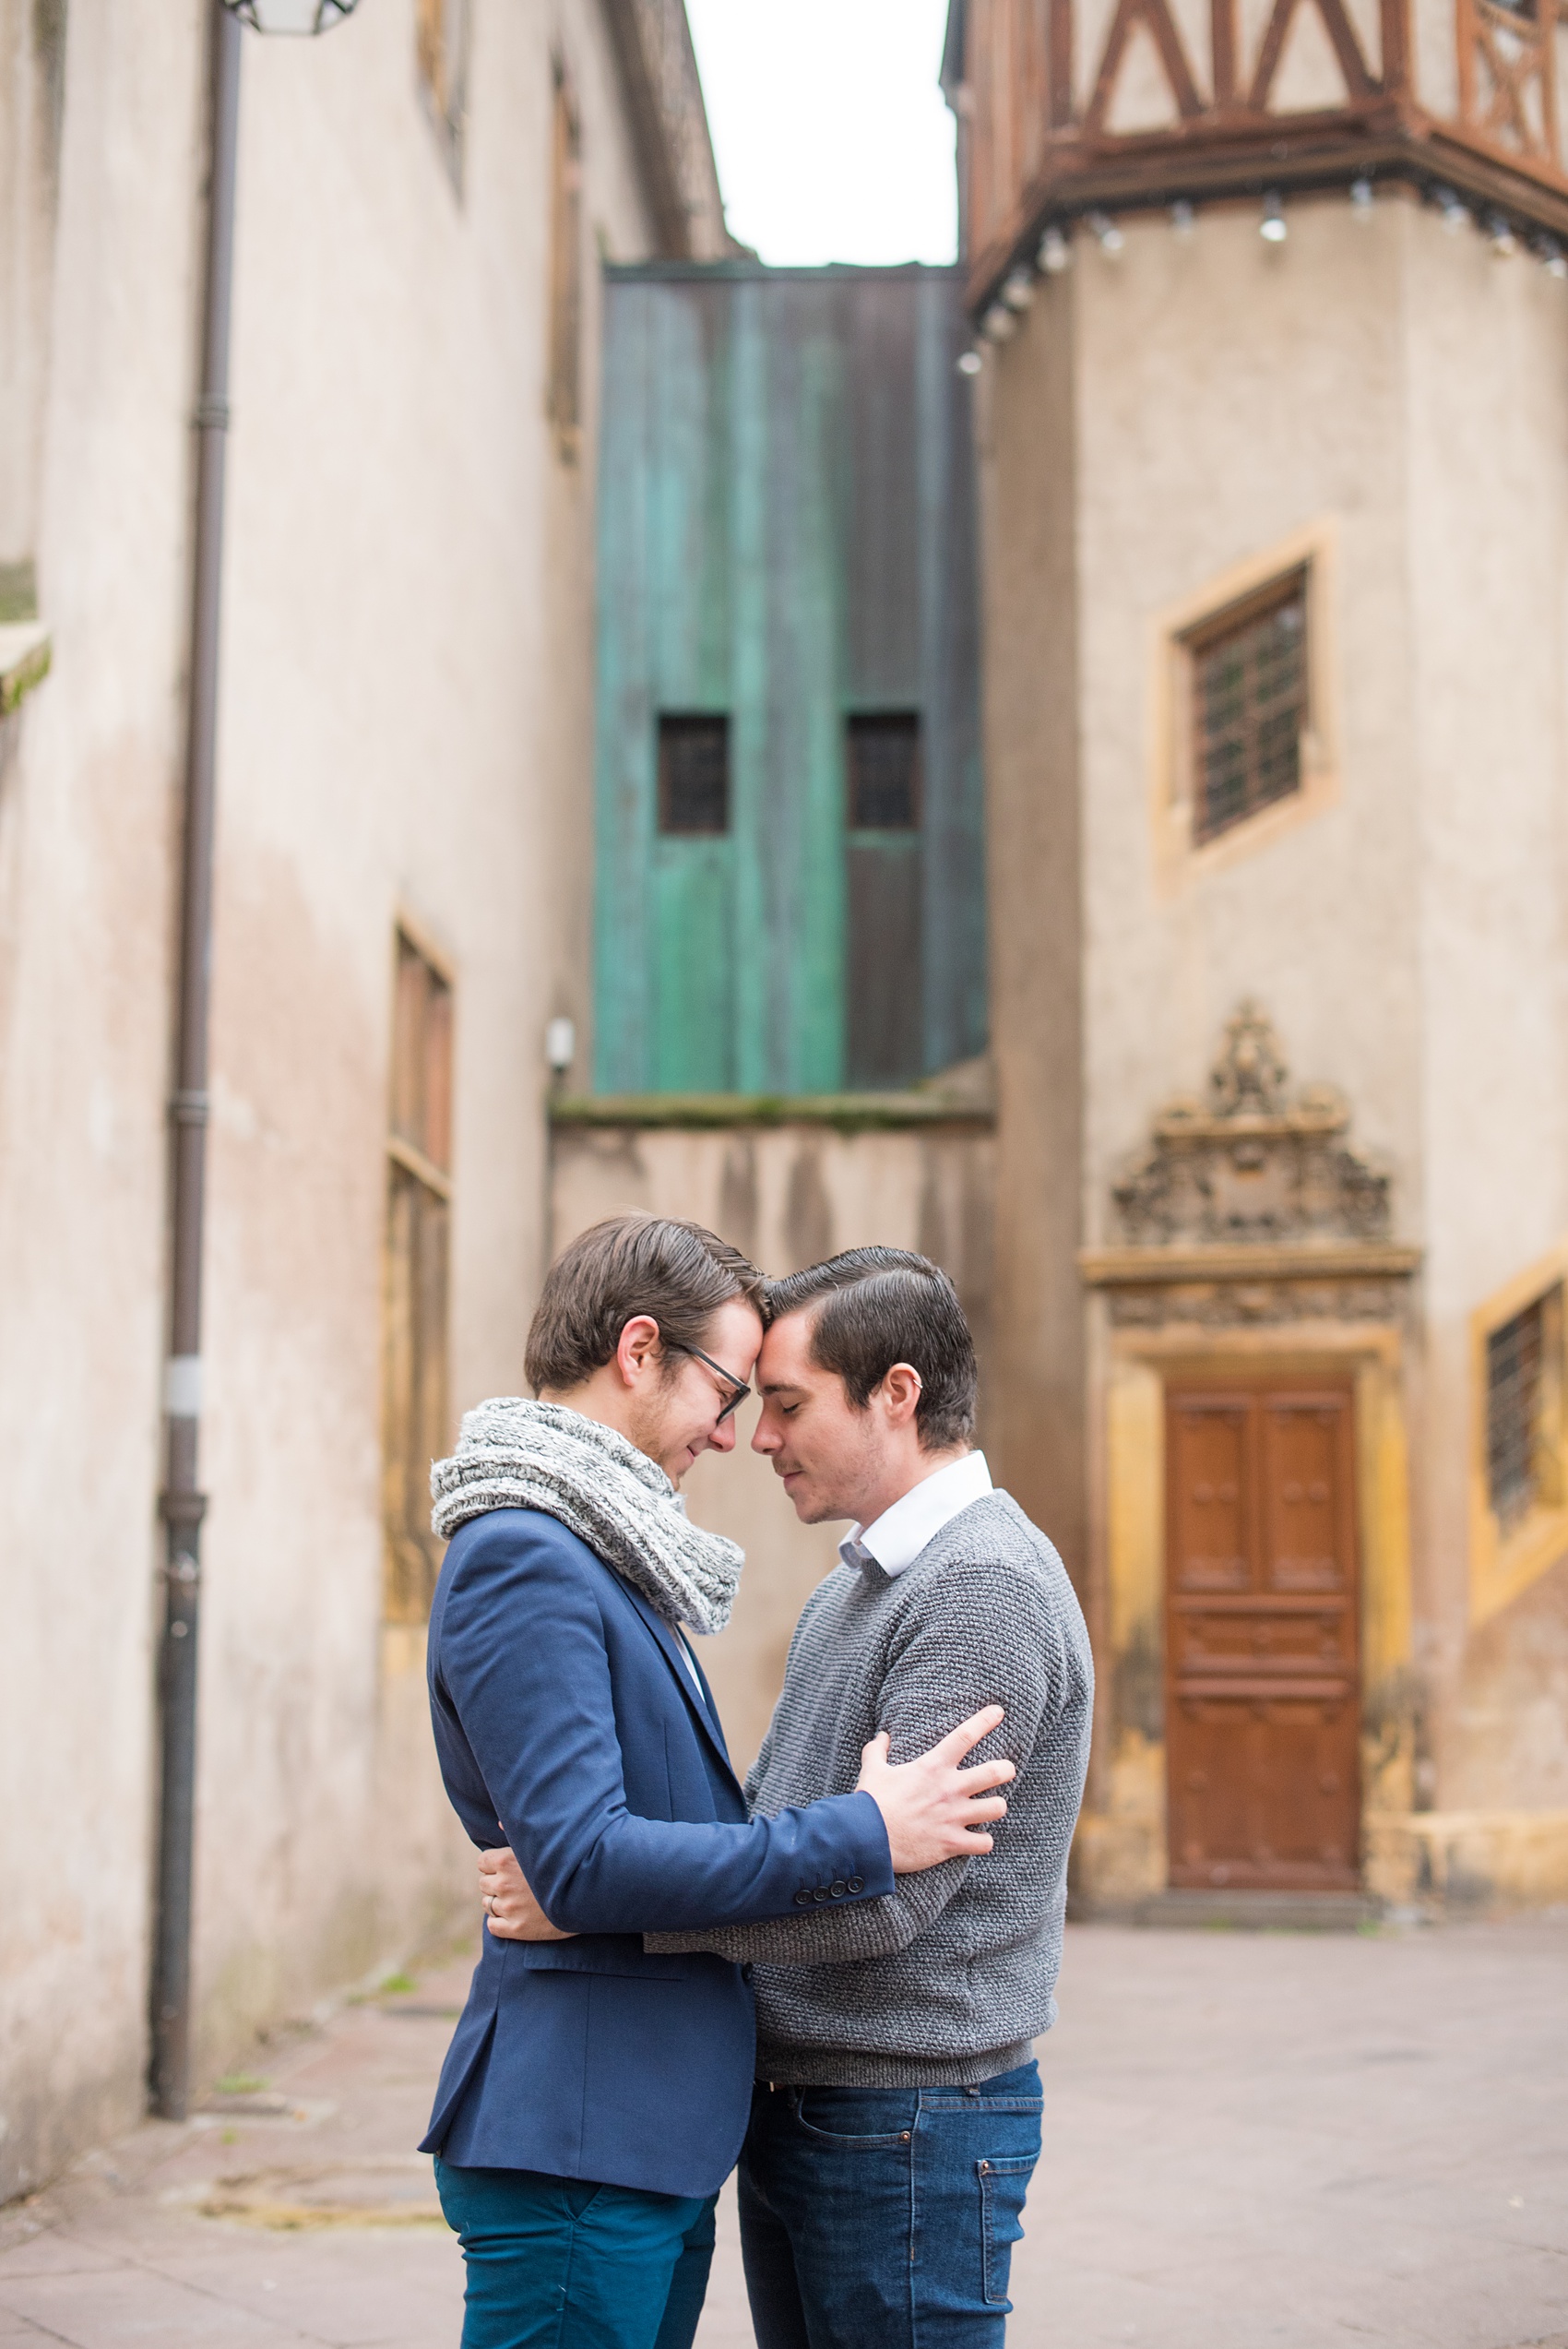 Mikkel Paige Photography pictures of an engagement session in Colmar, France in the Alsace region. Photo of a same sex couple in the historic city center.